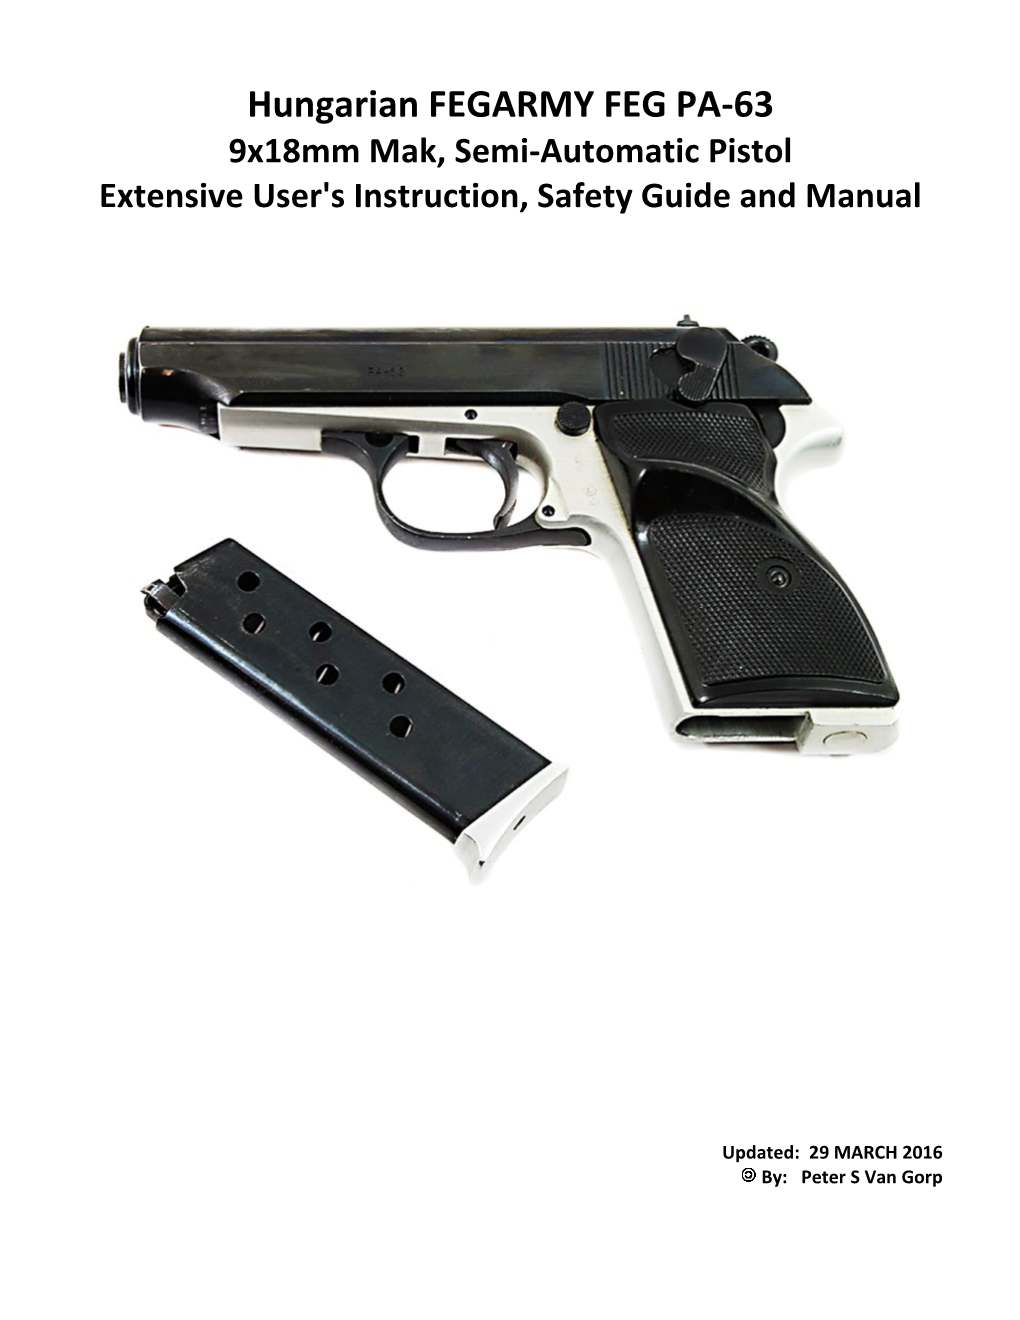 FEG PA-63 Pistol Extensive User's Instruction and Safety Guide And